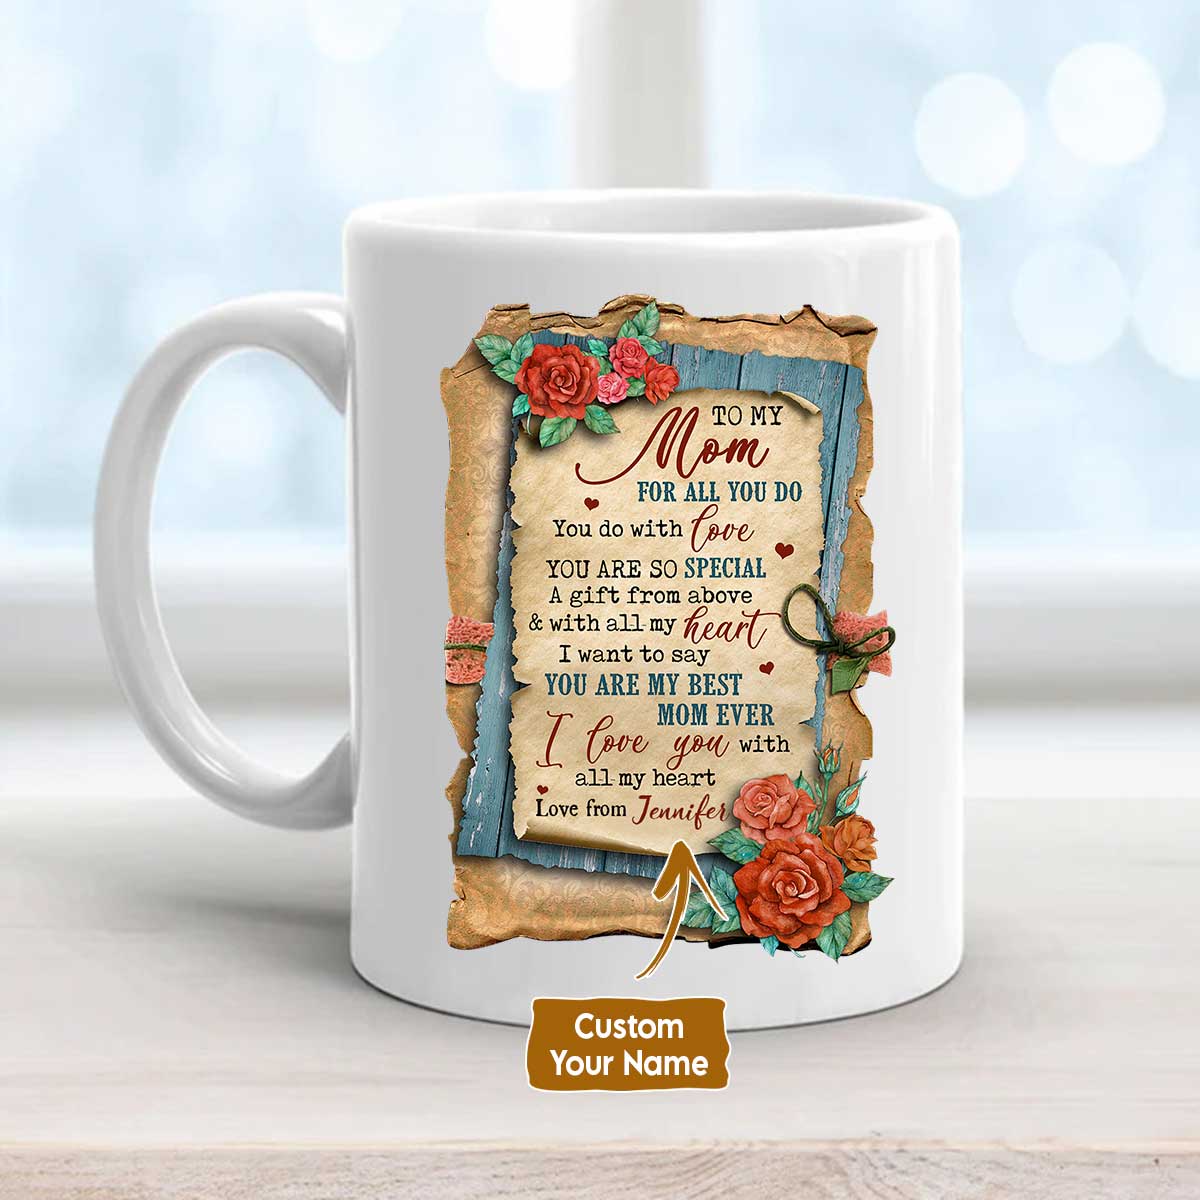 Gift For Mom Personalized Mug - Daughter to mom, Vintage letter, Rose painting Mug - Custom Gift For Mother's Day, Presents for Mom - I love you Mug